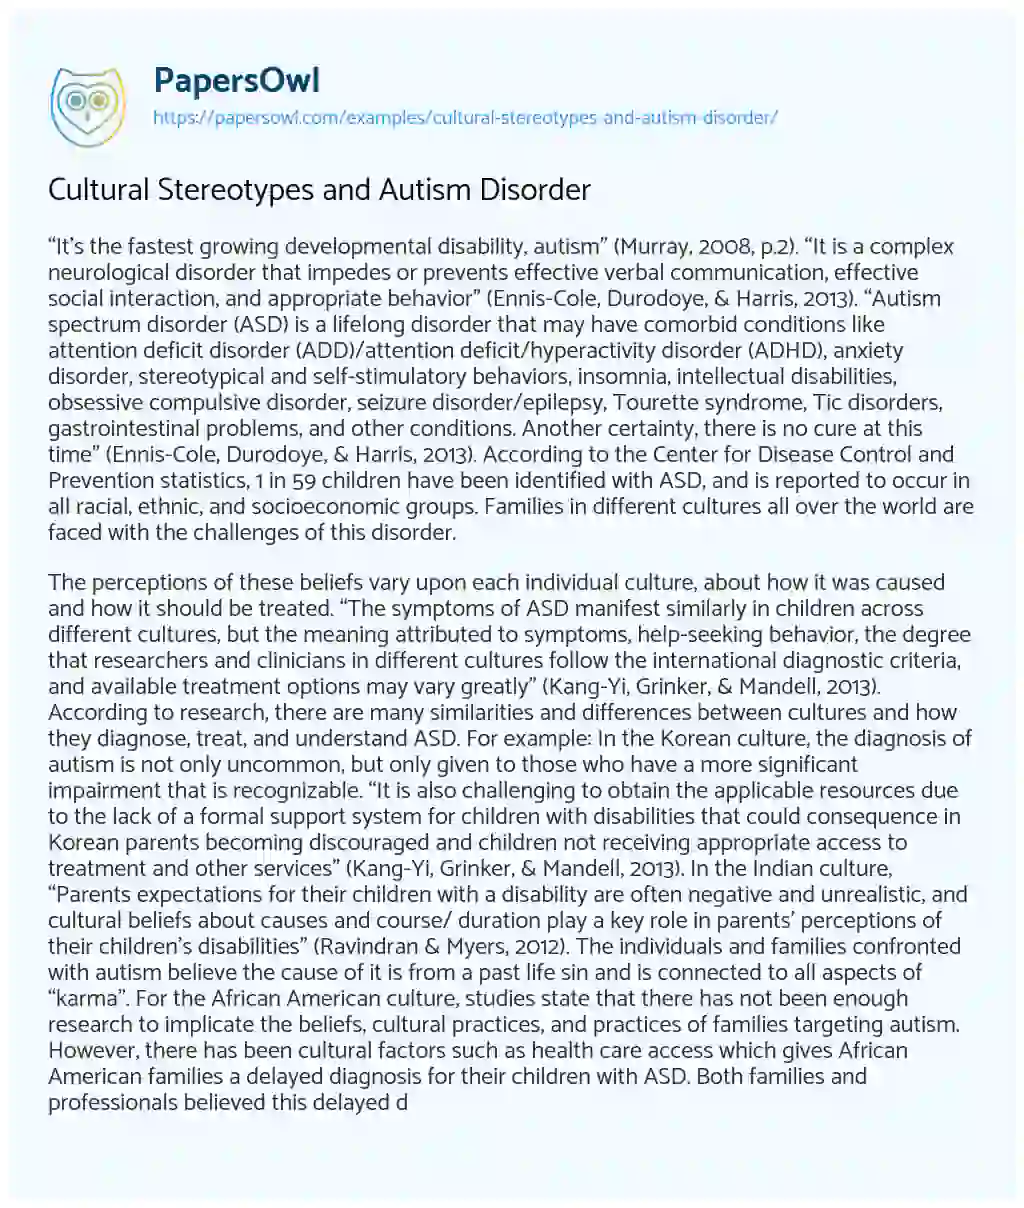 Essay on Cultural Stereotypes and Autism Disorder